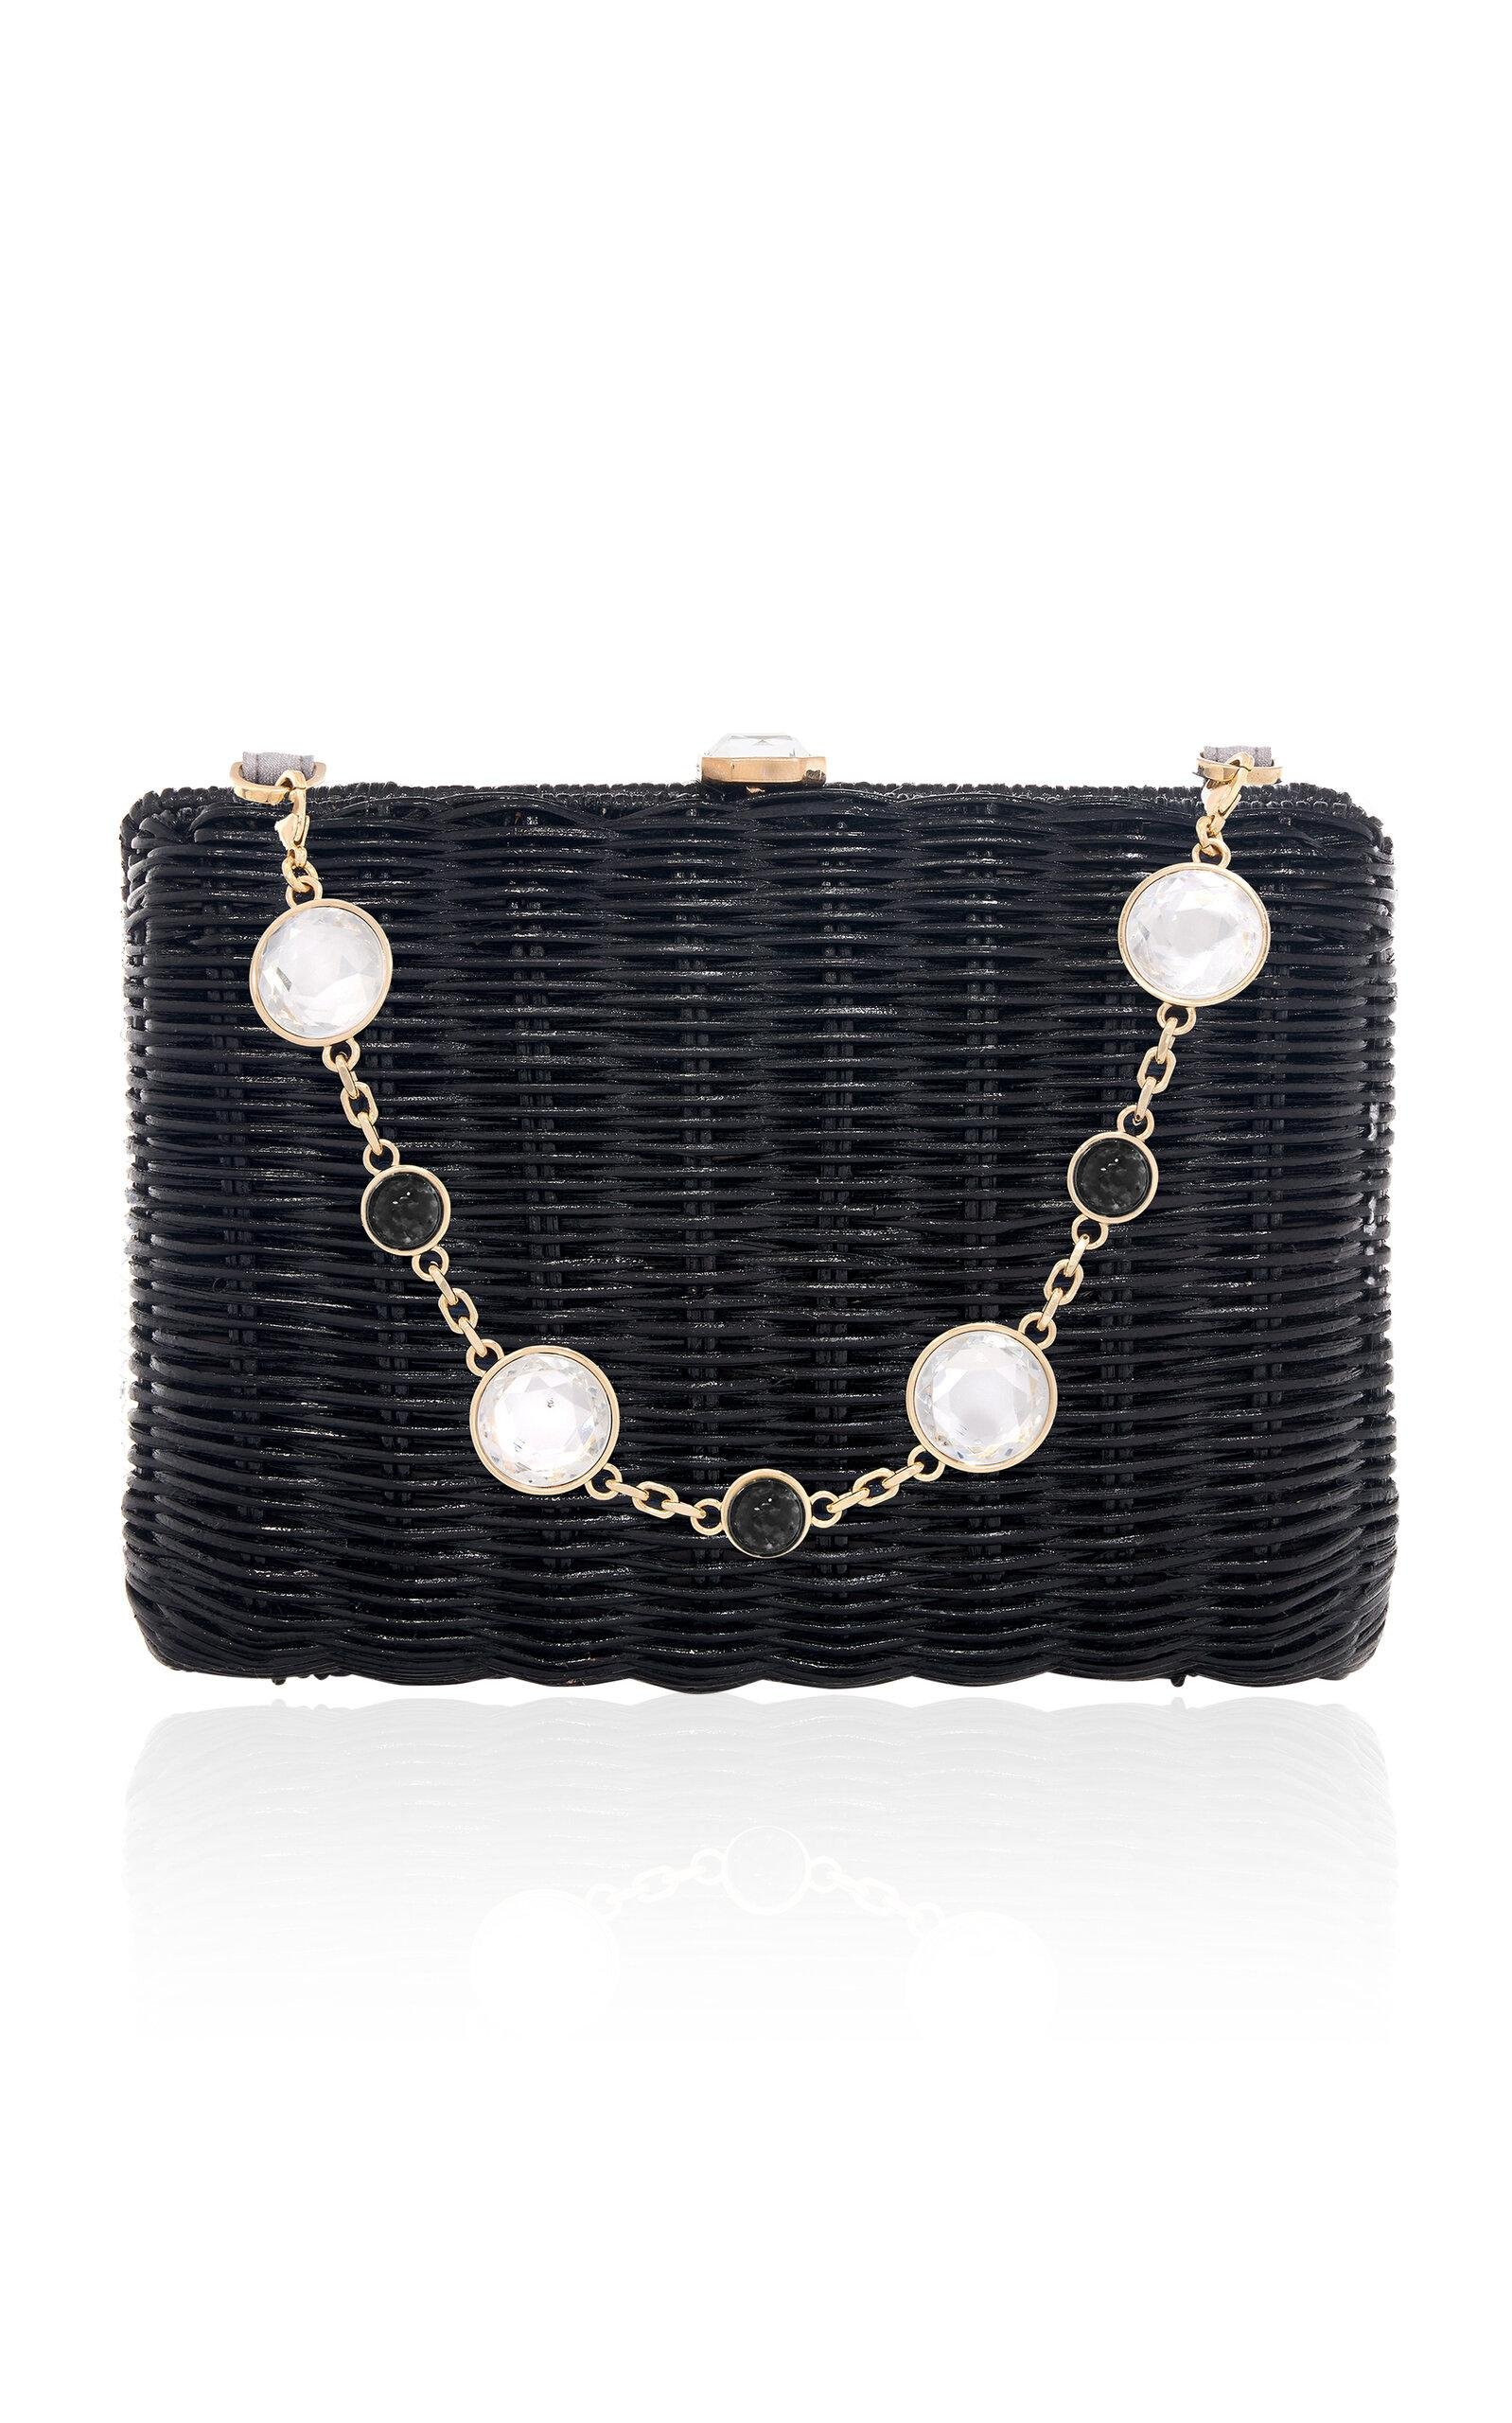 Judith Leiber Couture - Hailey Stone-Embellished Wicker Basket Clutch - Black - OS - Only At Moda Operandi by JUDITH LEIBER COUTURE